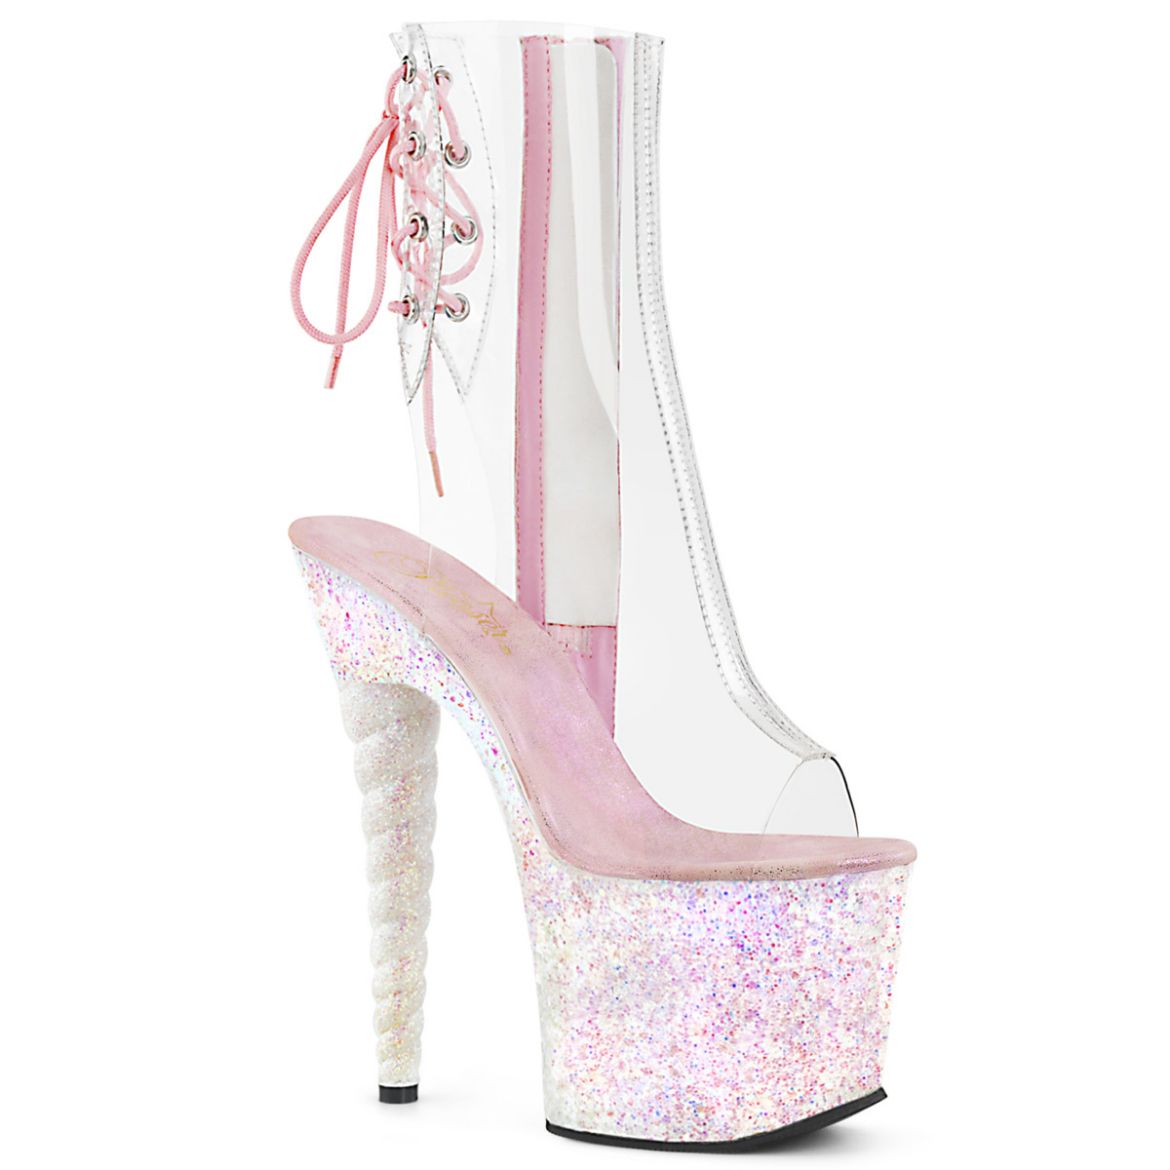 Product image of Pleaser Unicorn-1018C Clear/Opal Multi Glitter, 7 inch (17.8 cm) Heel, 2 3/4 inch (7 cm) Platform Ankle Boot